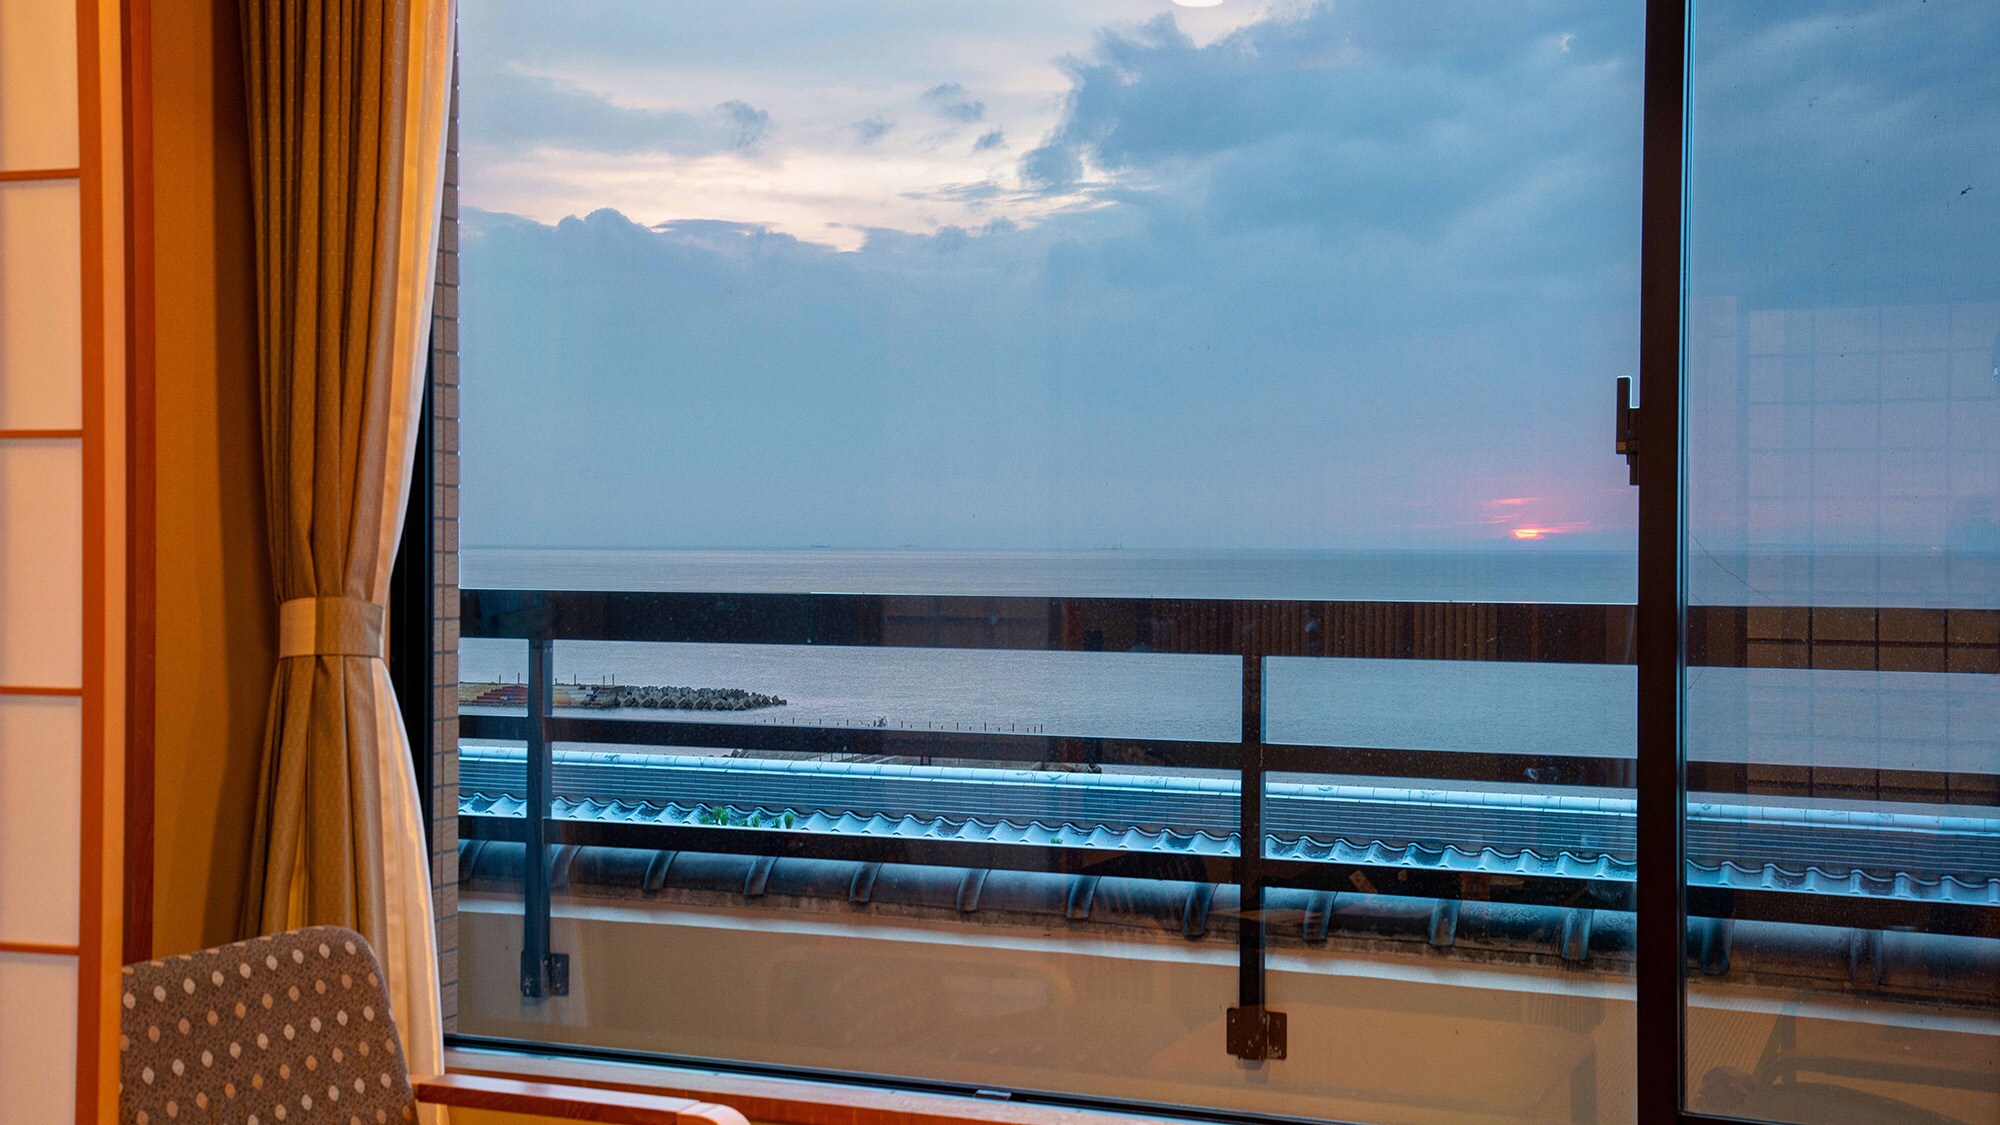 * [Landscape] All rooms have ocean views! The setting sun on the horizon is a masterpiece!